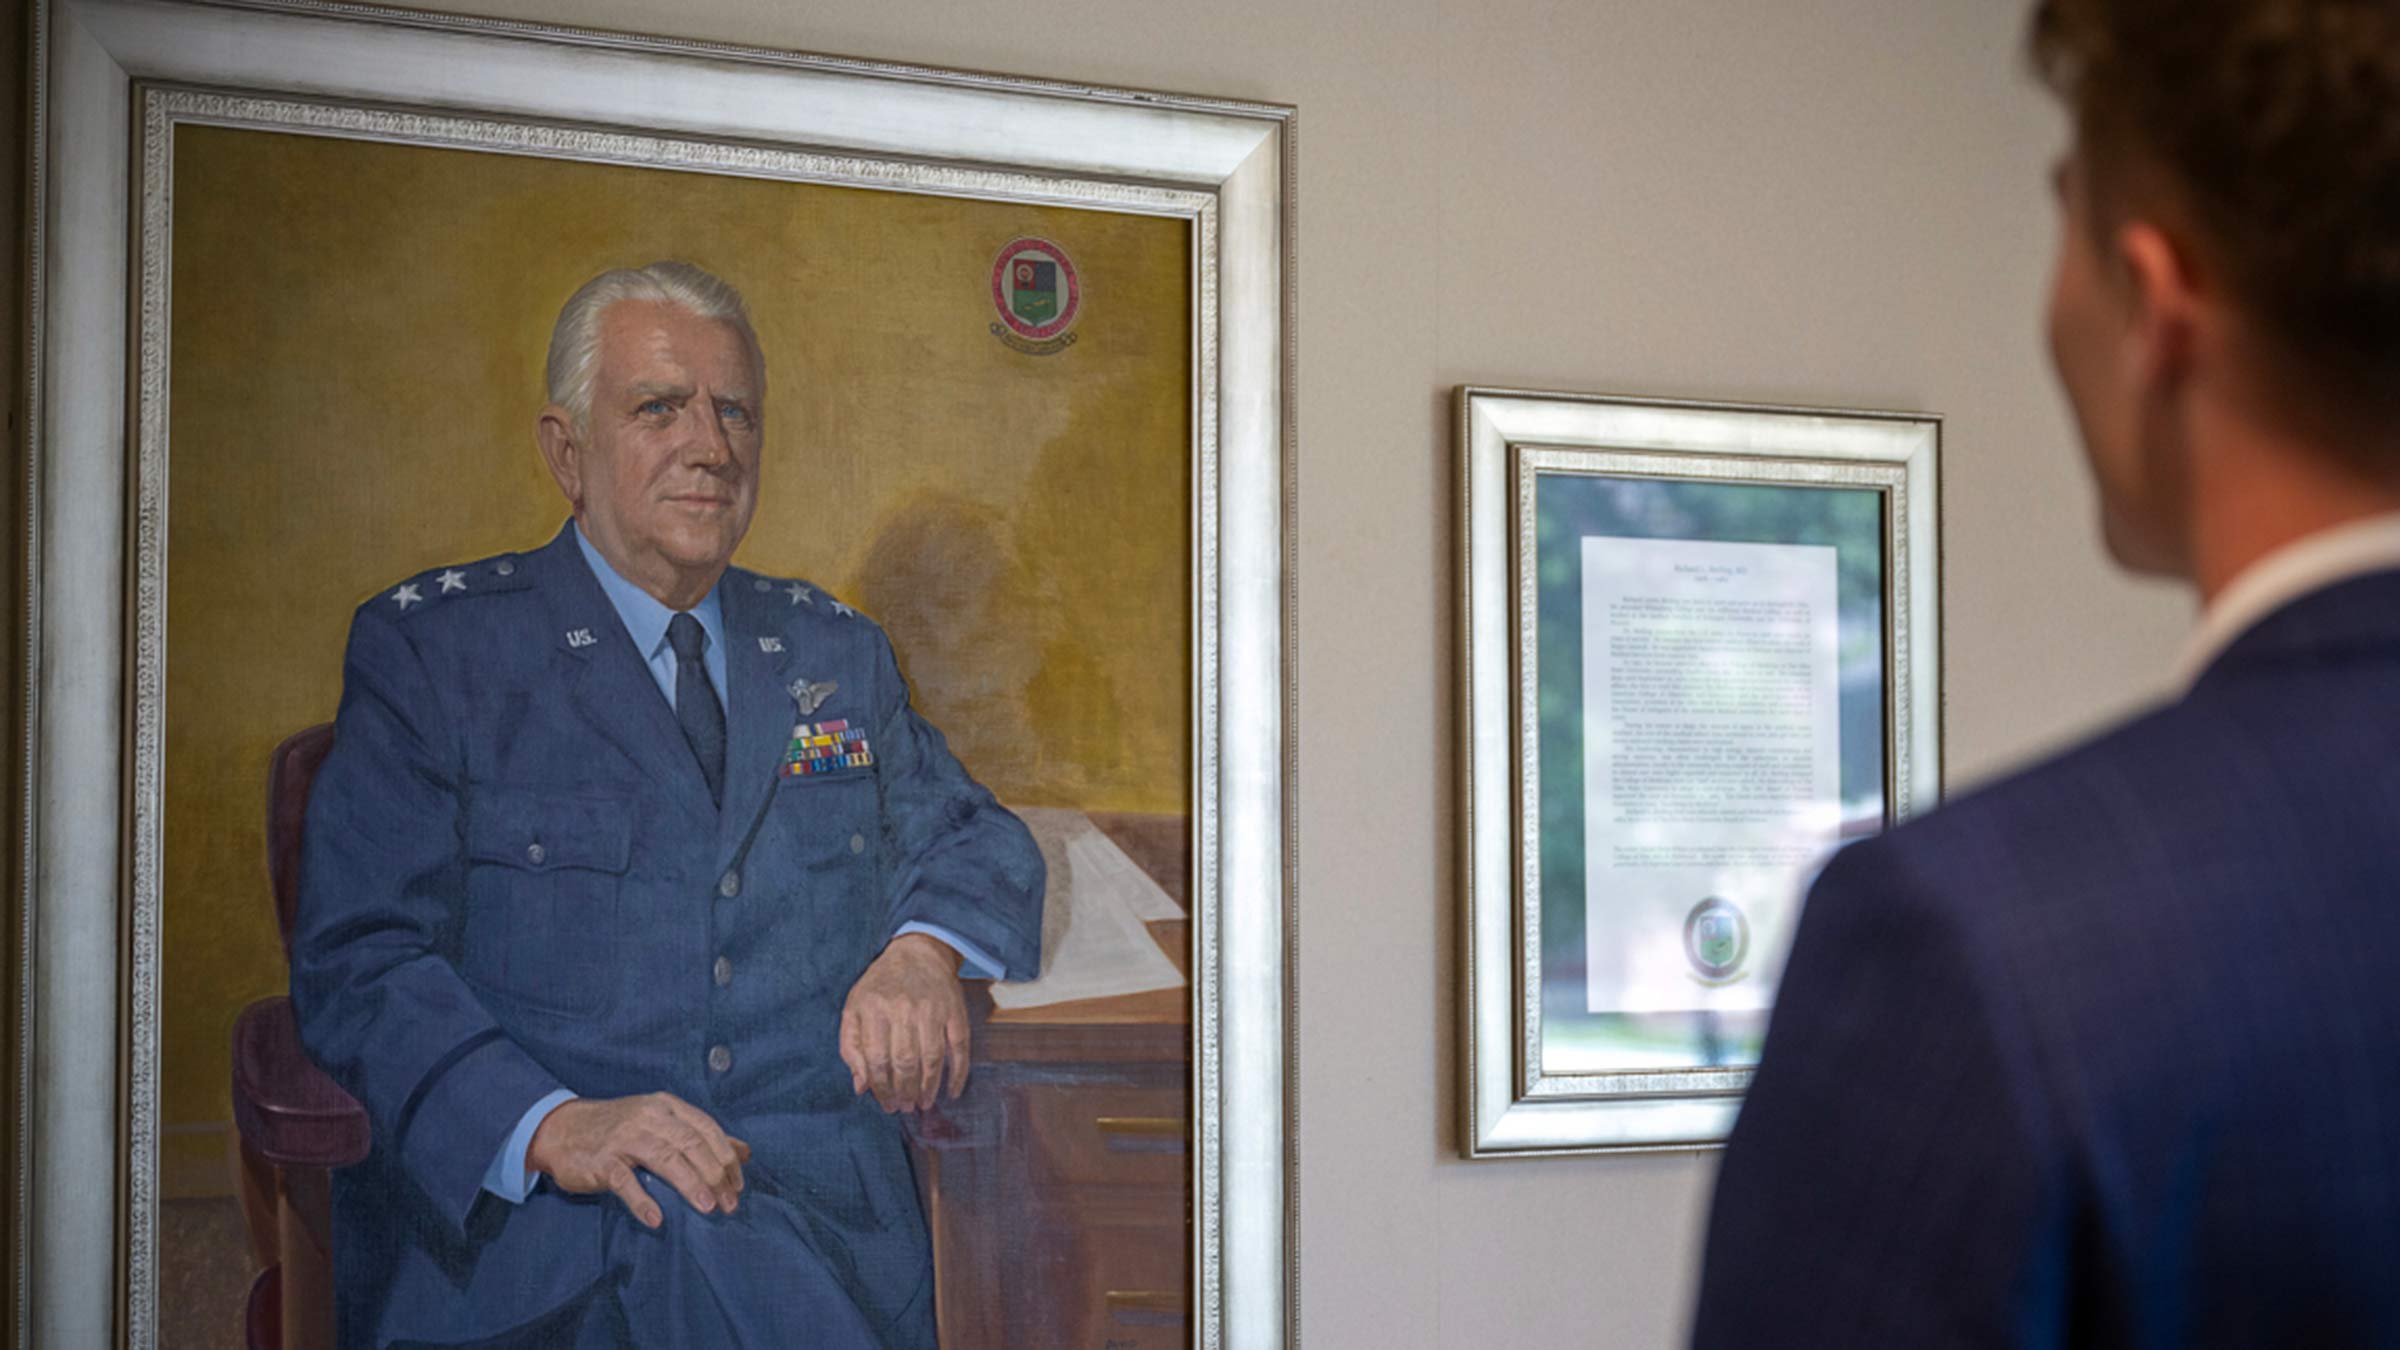 Collin Todd looking at the portrait of Richard Meiling, MD